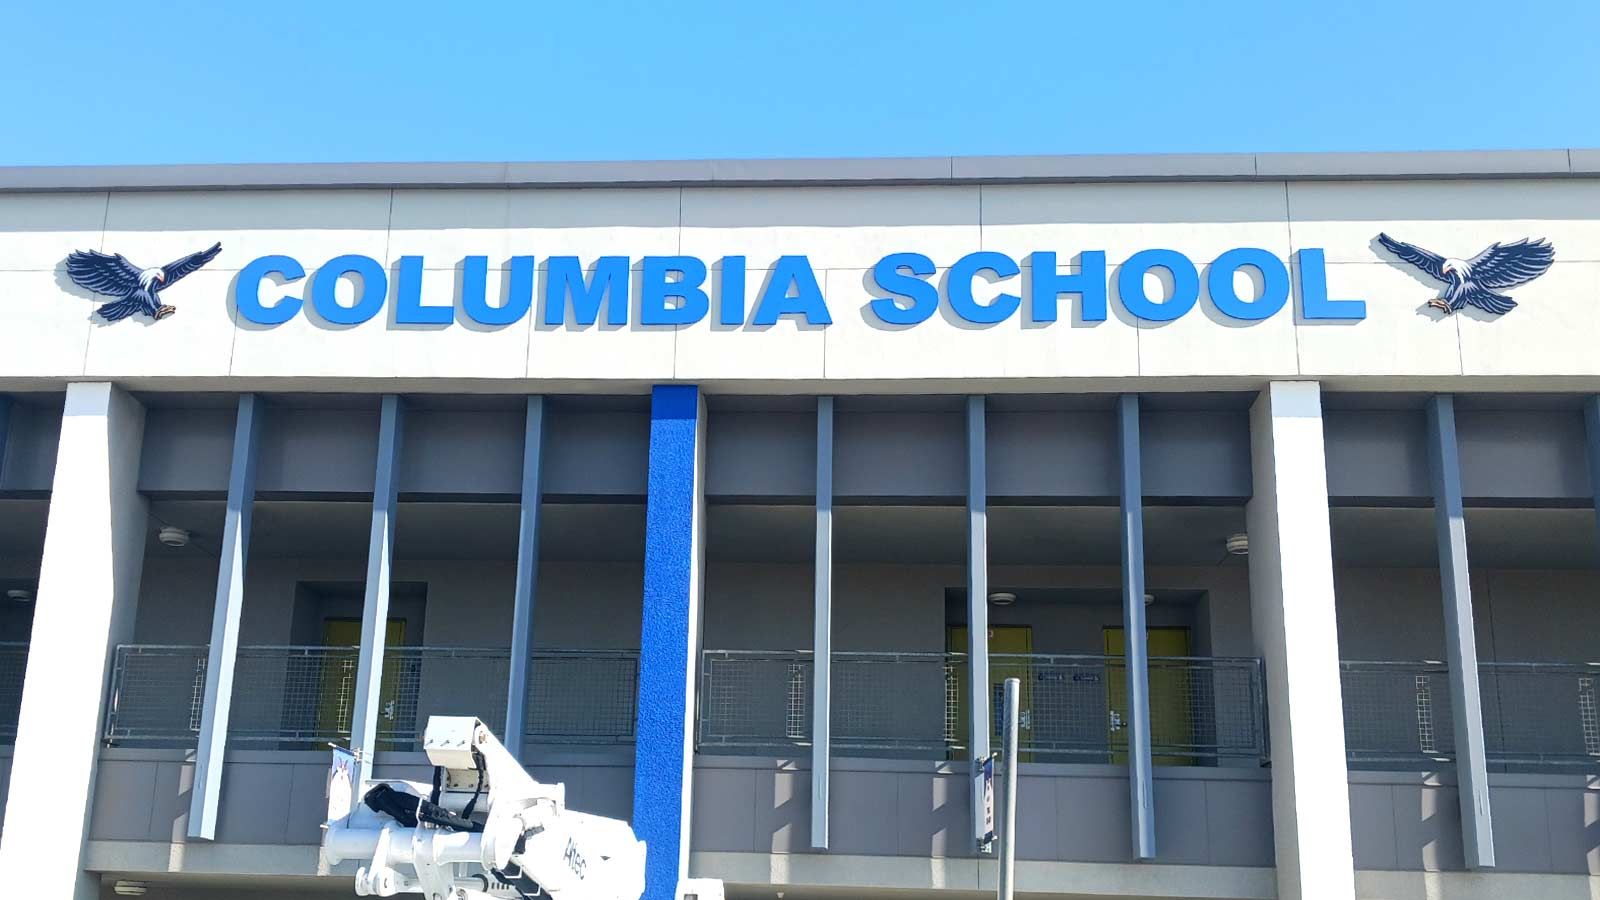 Columbia School pvc 3d letters mounted to the building